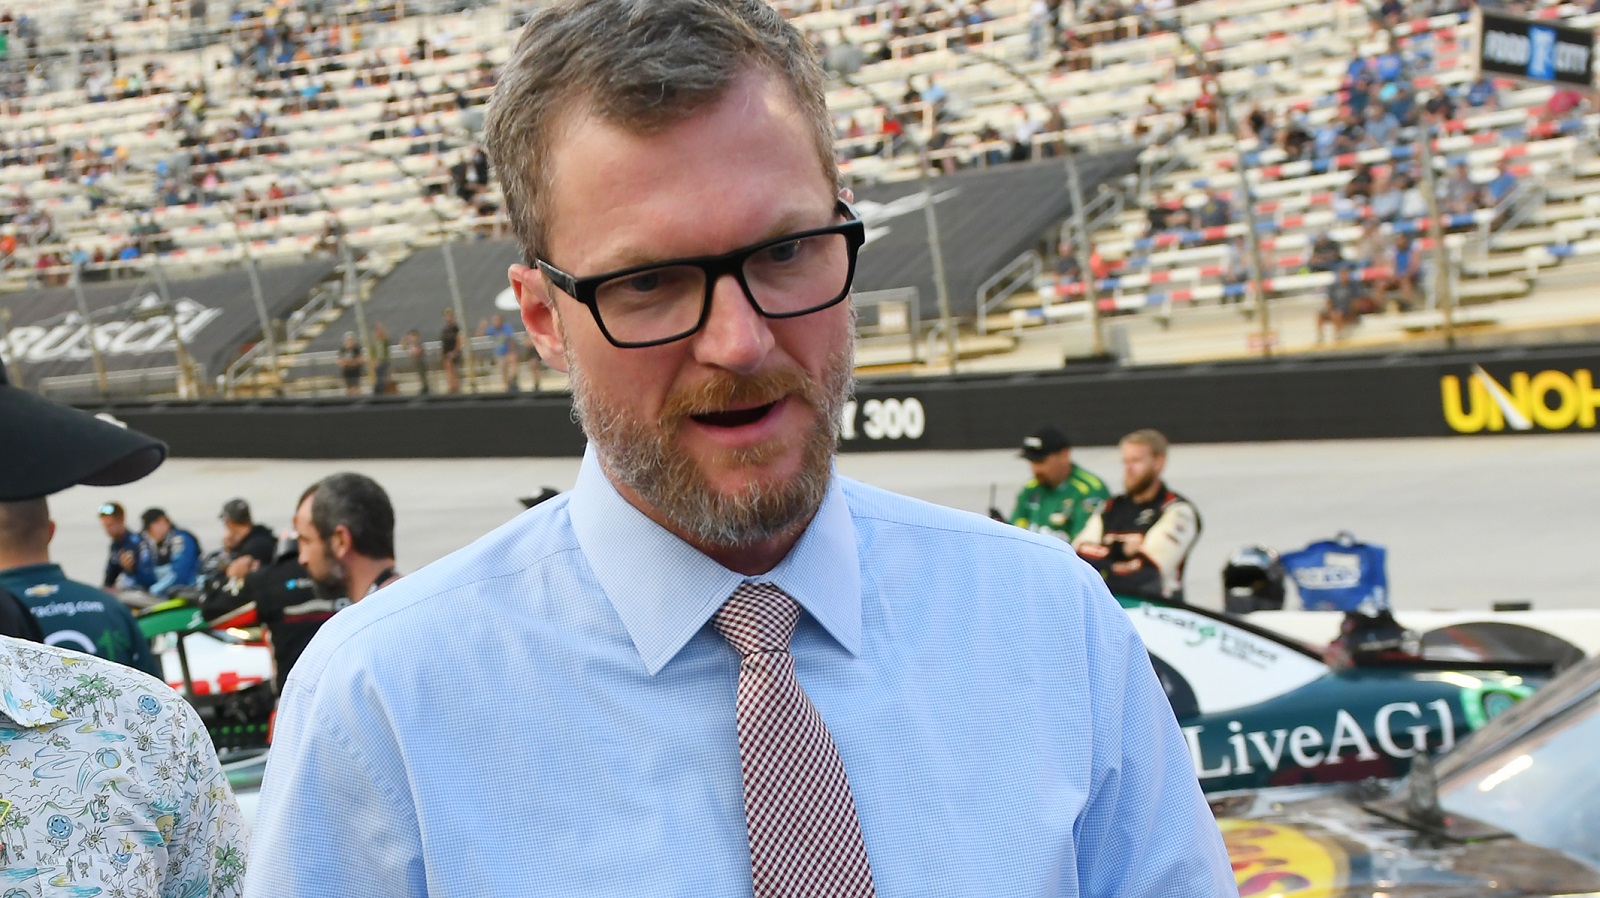 Dale Earnhardt, Jr. before the NASCAR Xfinity Series Food City 300 on Sept. 16, 2022 at Bristol Motor Speedway. | Jeffrey Vest/Icon Sportswire via Getty Images